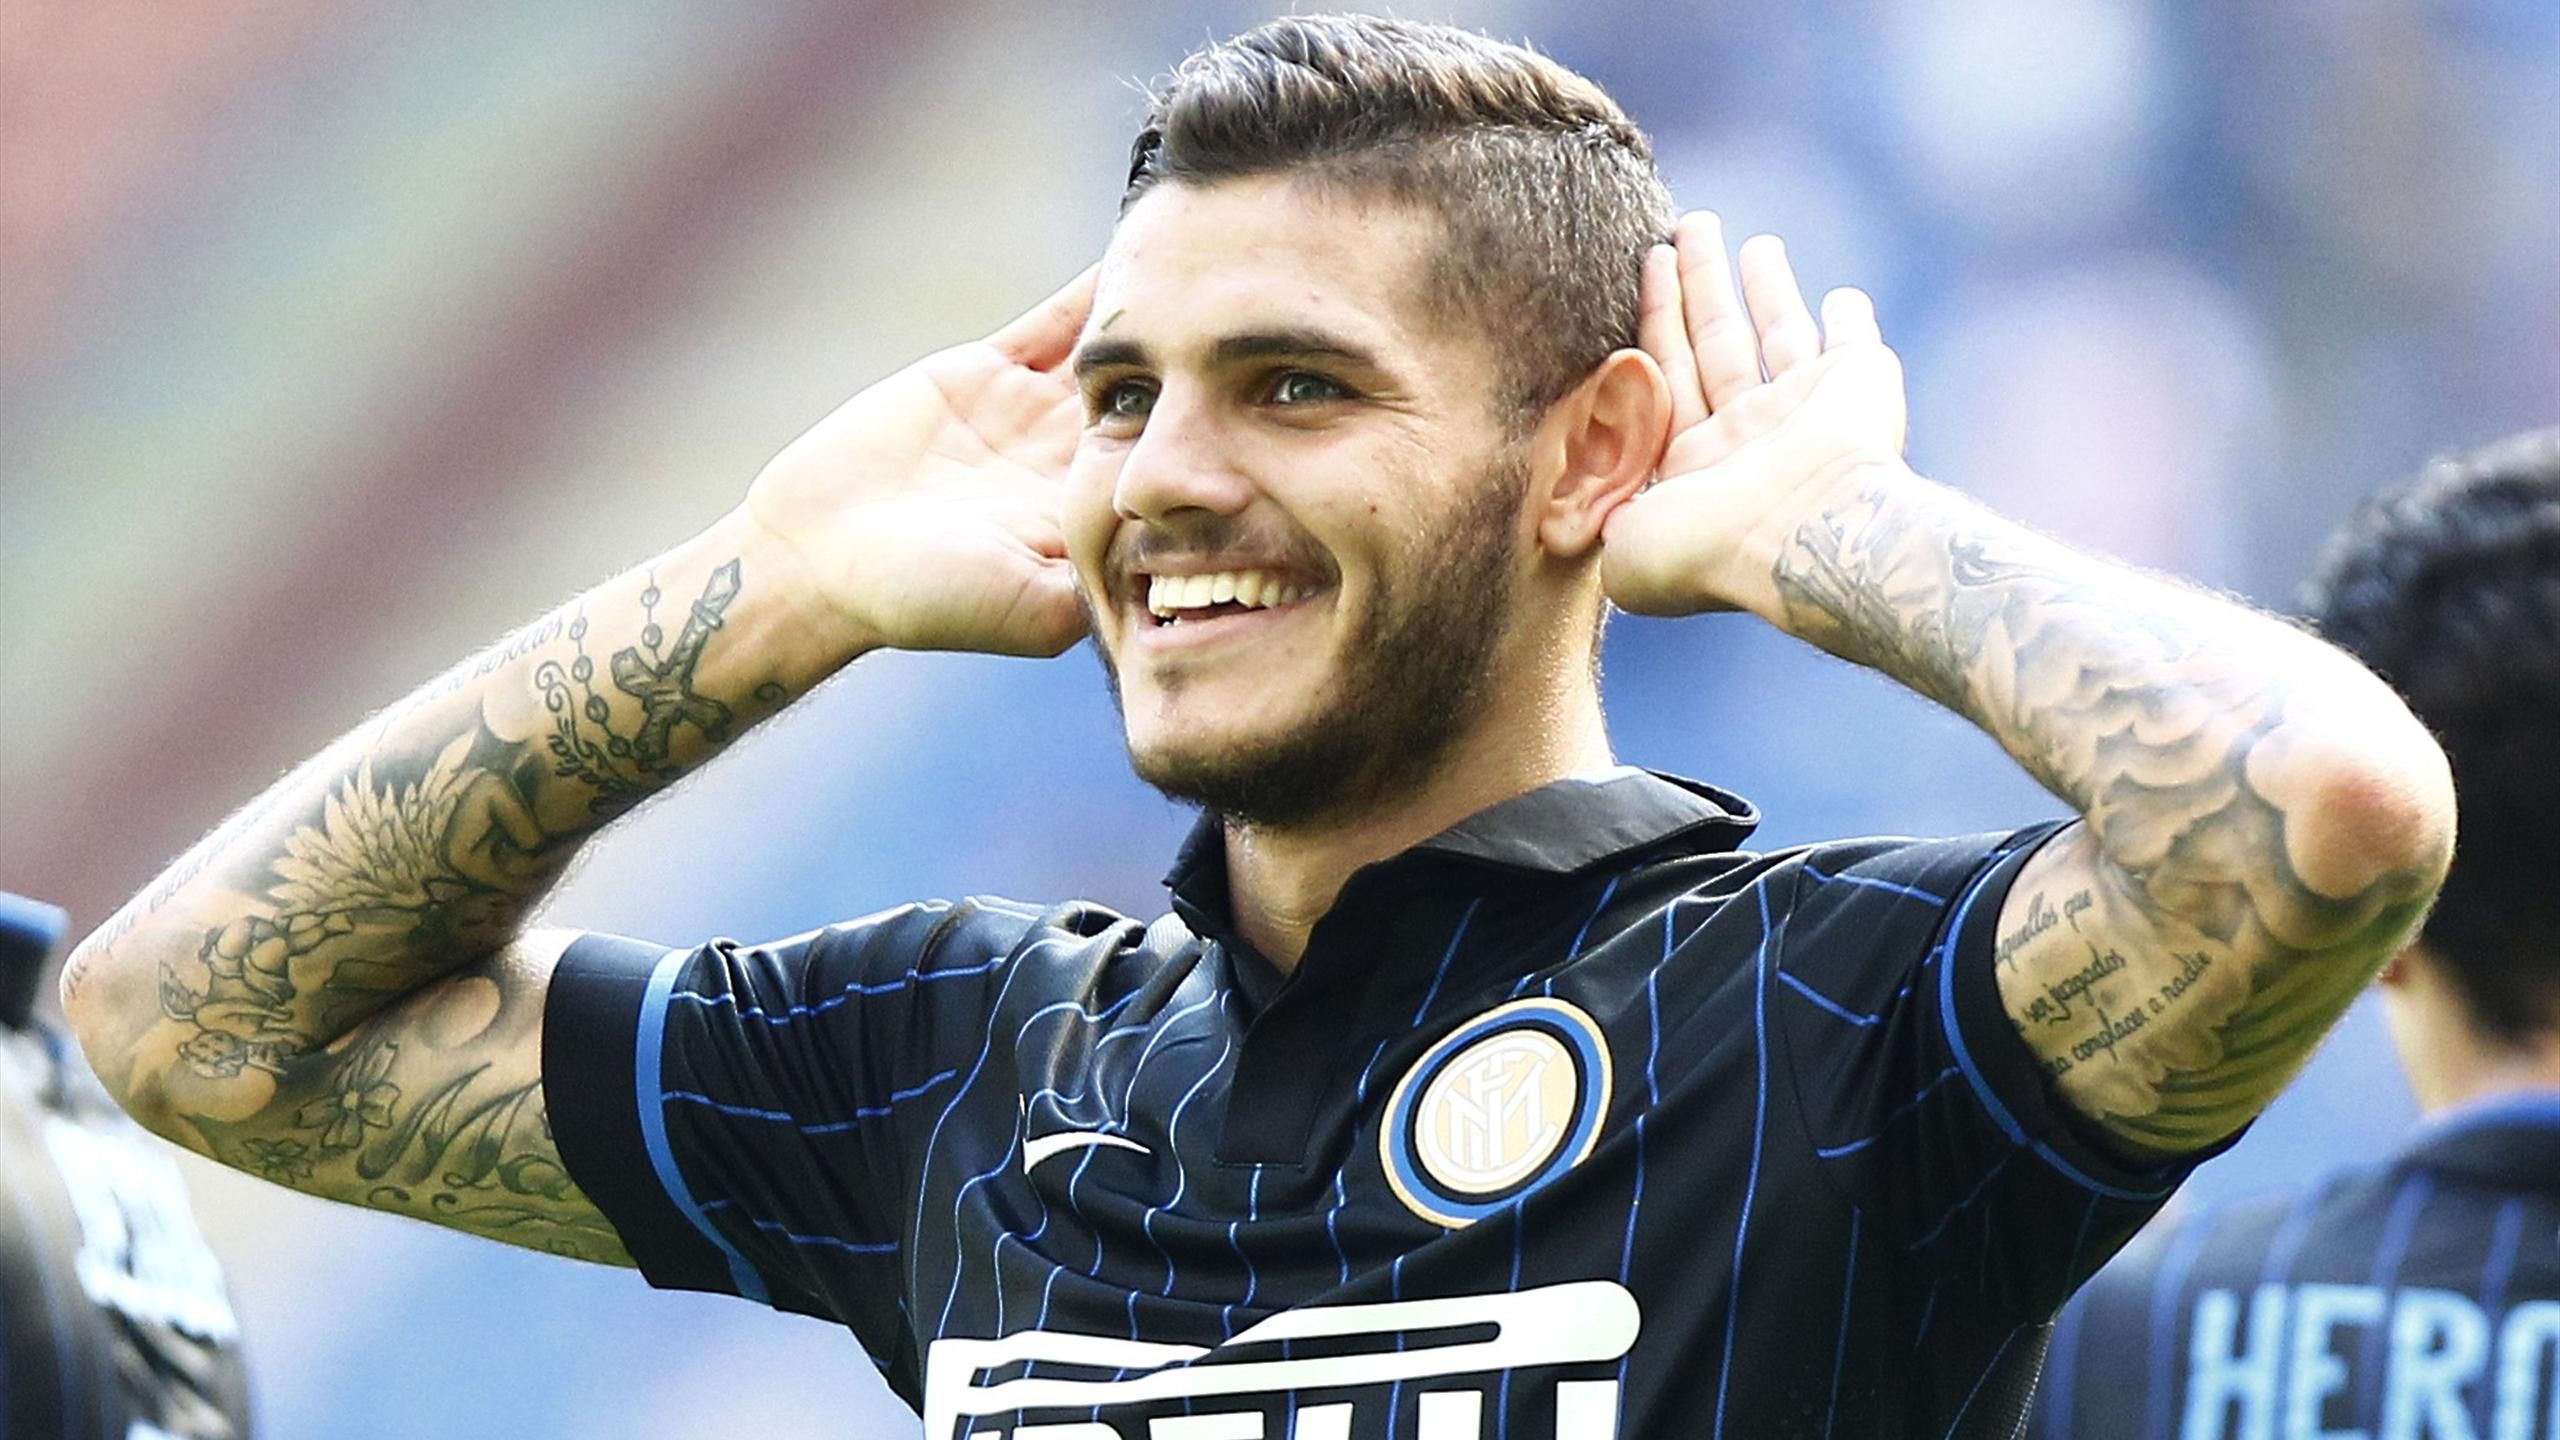 Confound with silence' - Icardi makes another cryptic post on Instagram|  All Football